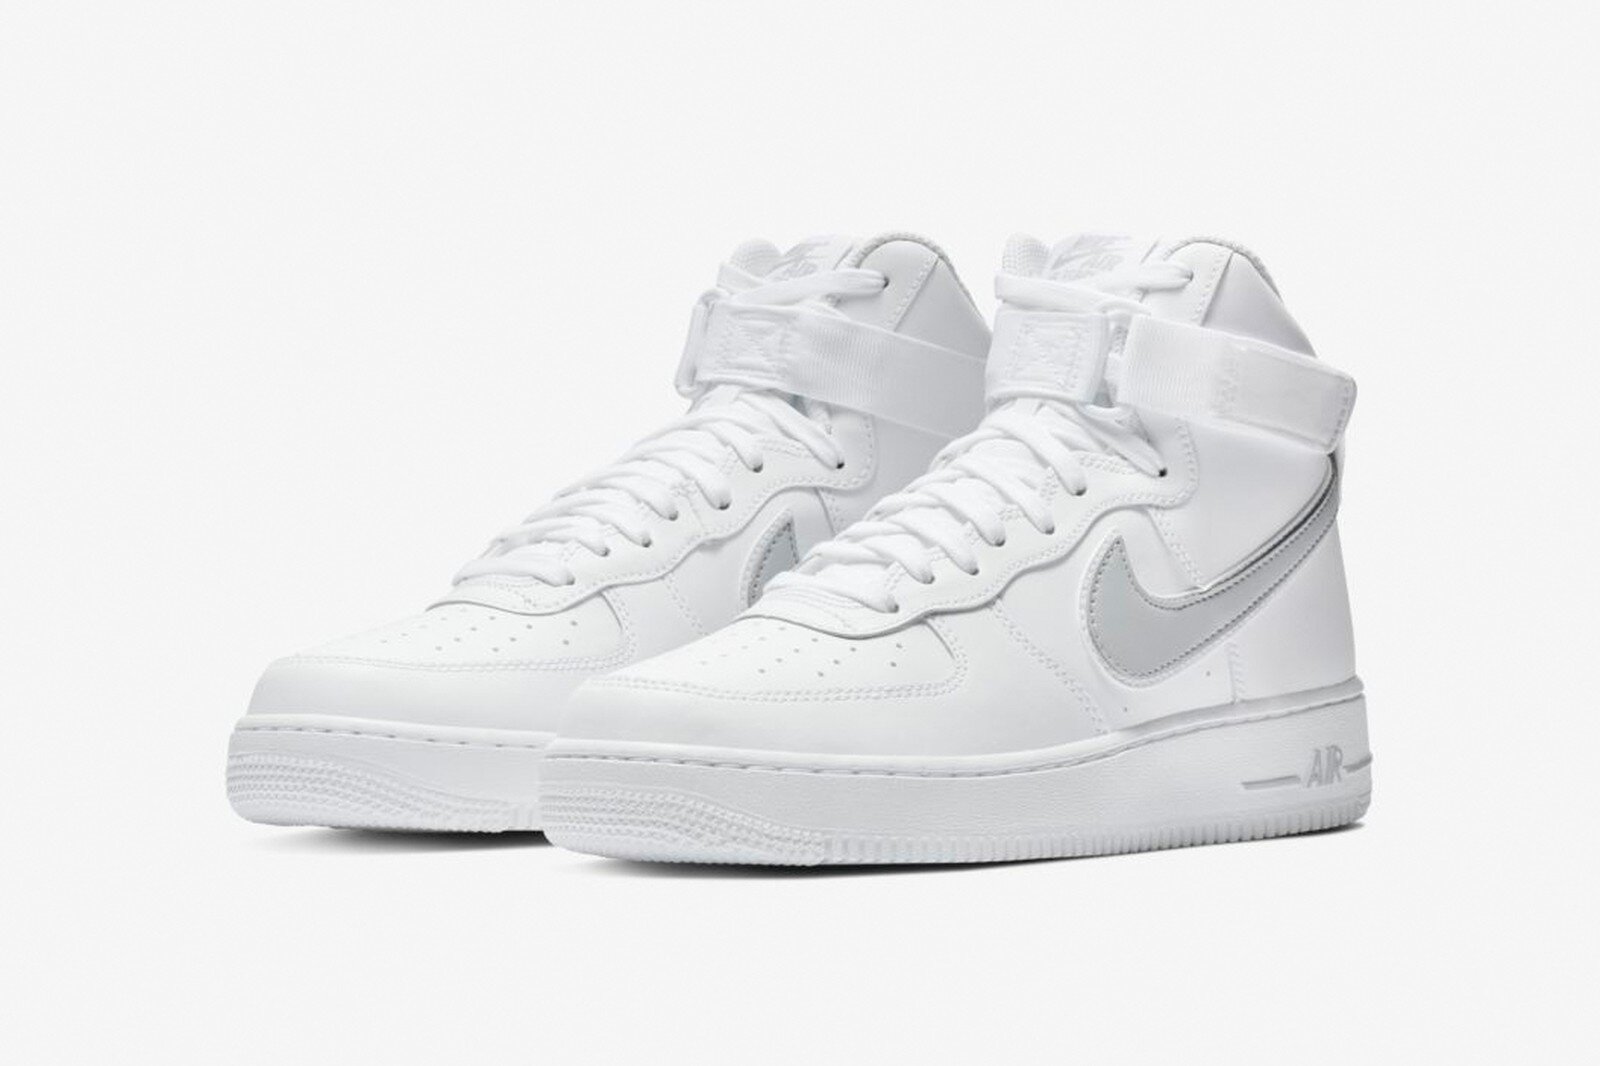 the first nike air force 1